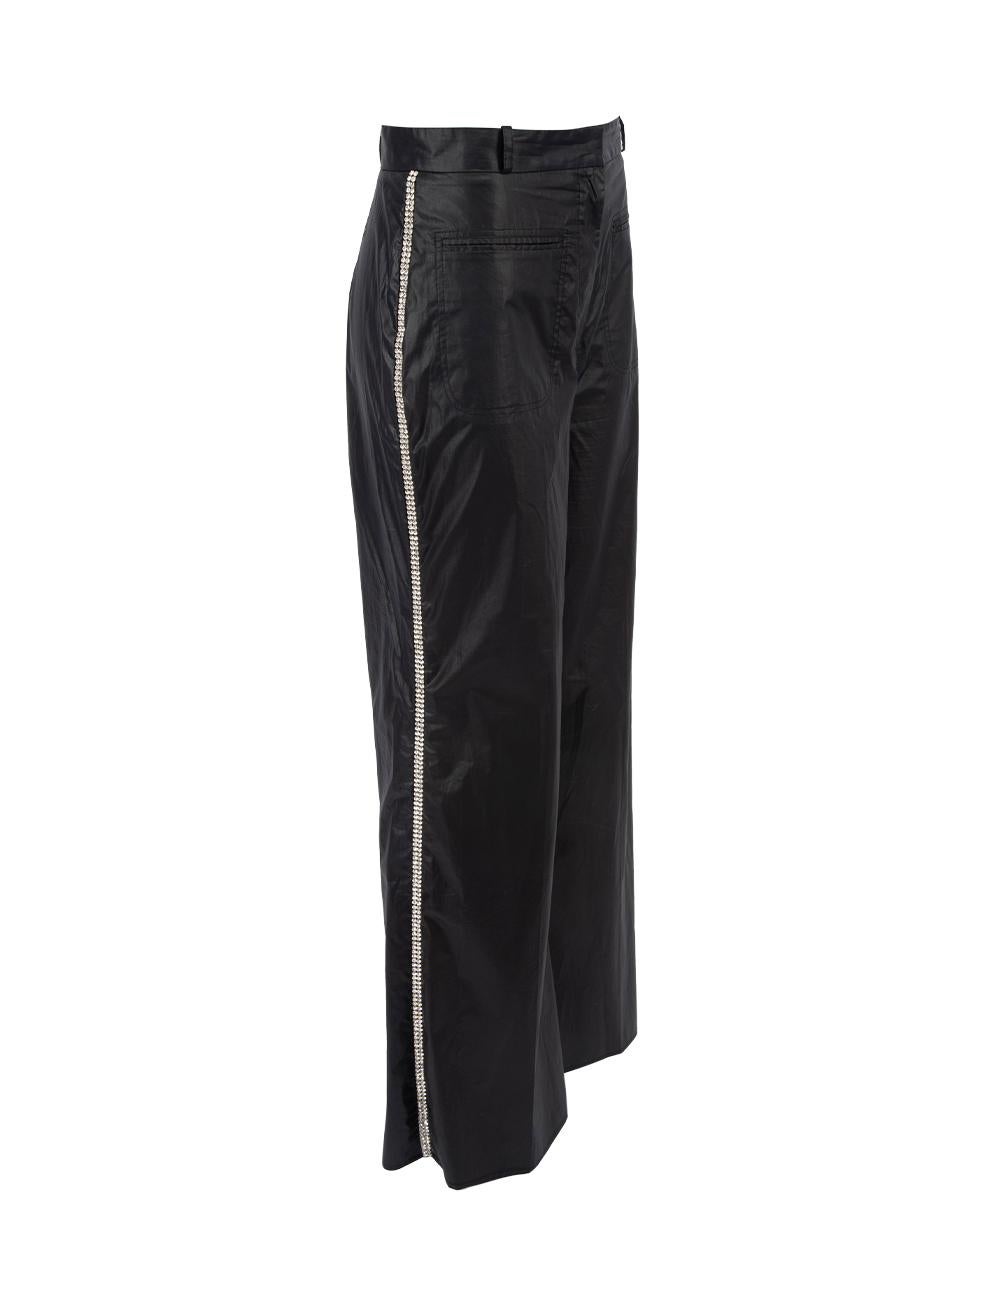 CONDITION is Very good. Hardly any visible wear to trousers is evident on this used Christopher Kane designer resale item. Details Black Cotton Trousers Wide leg High rise Diamanté detail on side seam Front zip closure with clasp 2x Front side